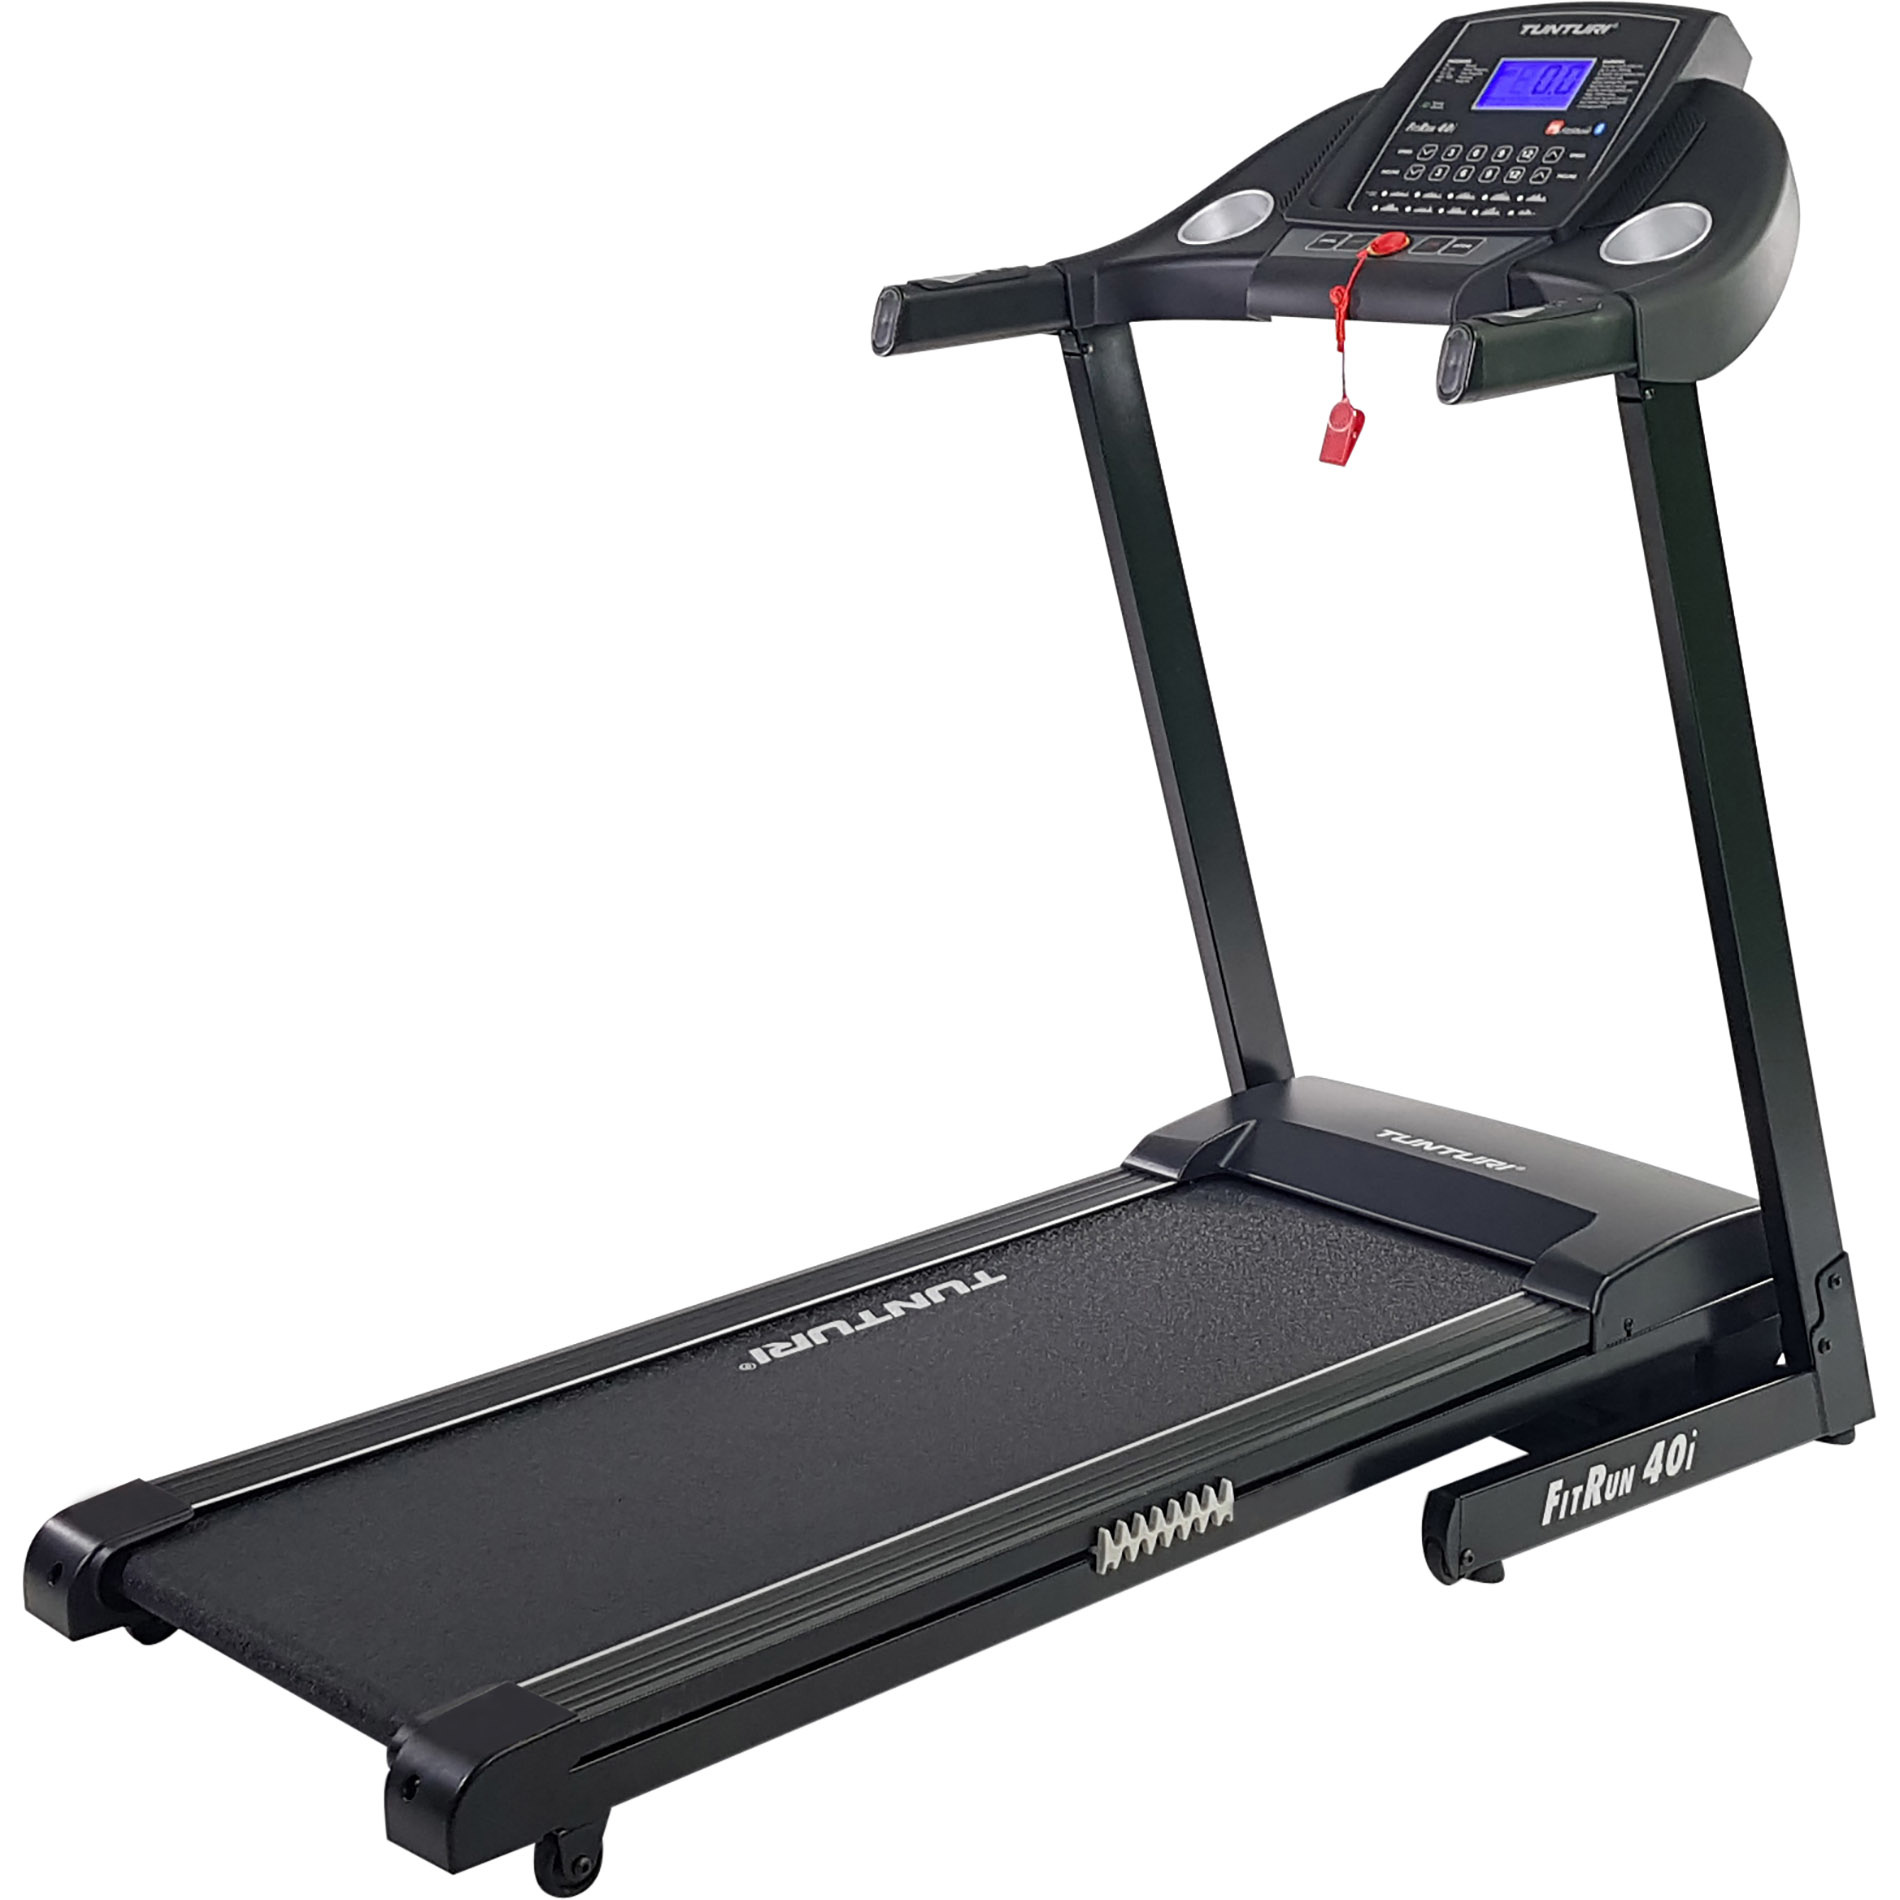 
Why Are Curved Treadmills So Expensive? Here's What You Need To Know